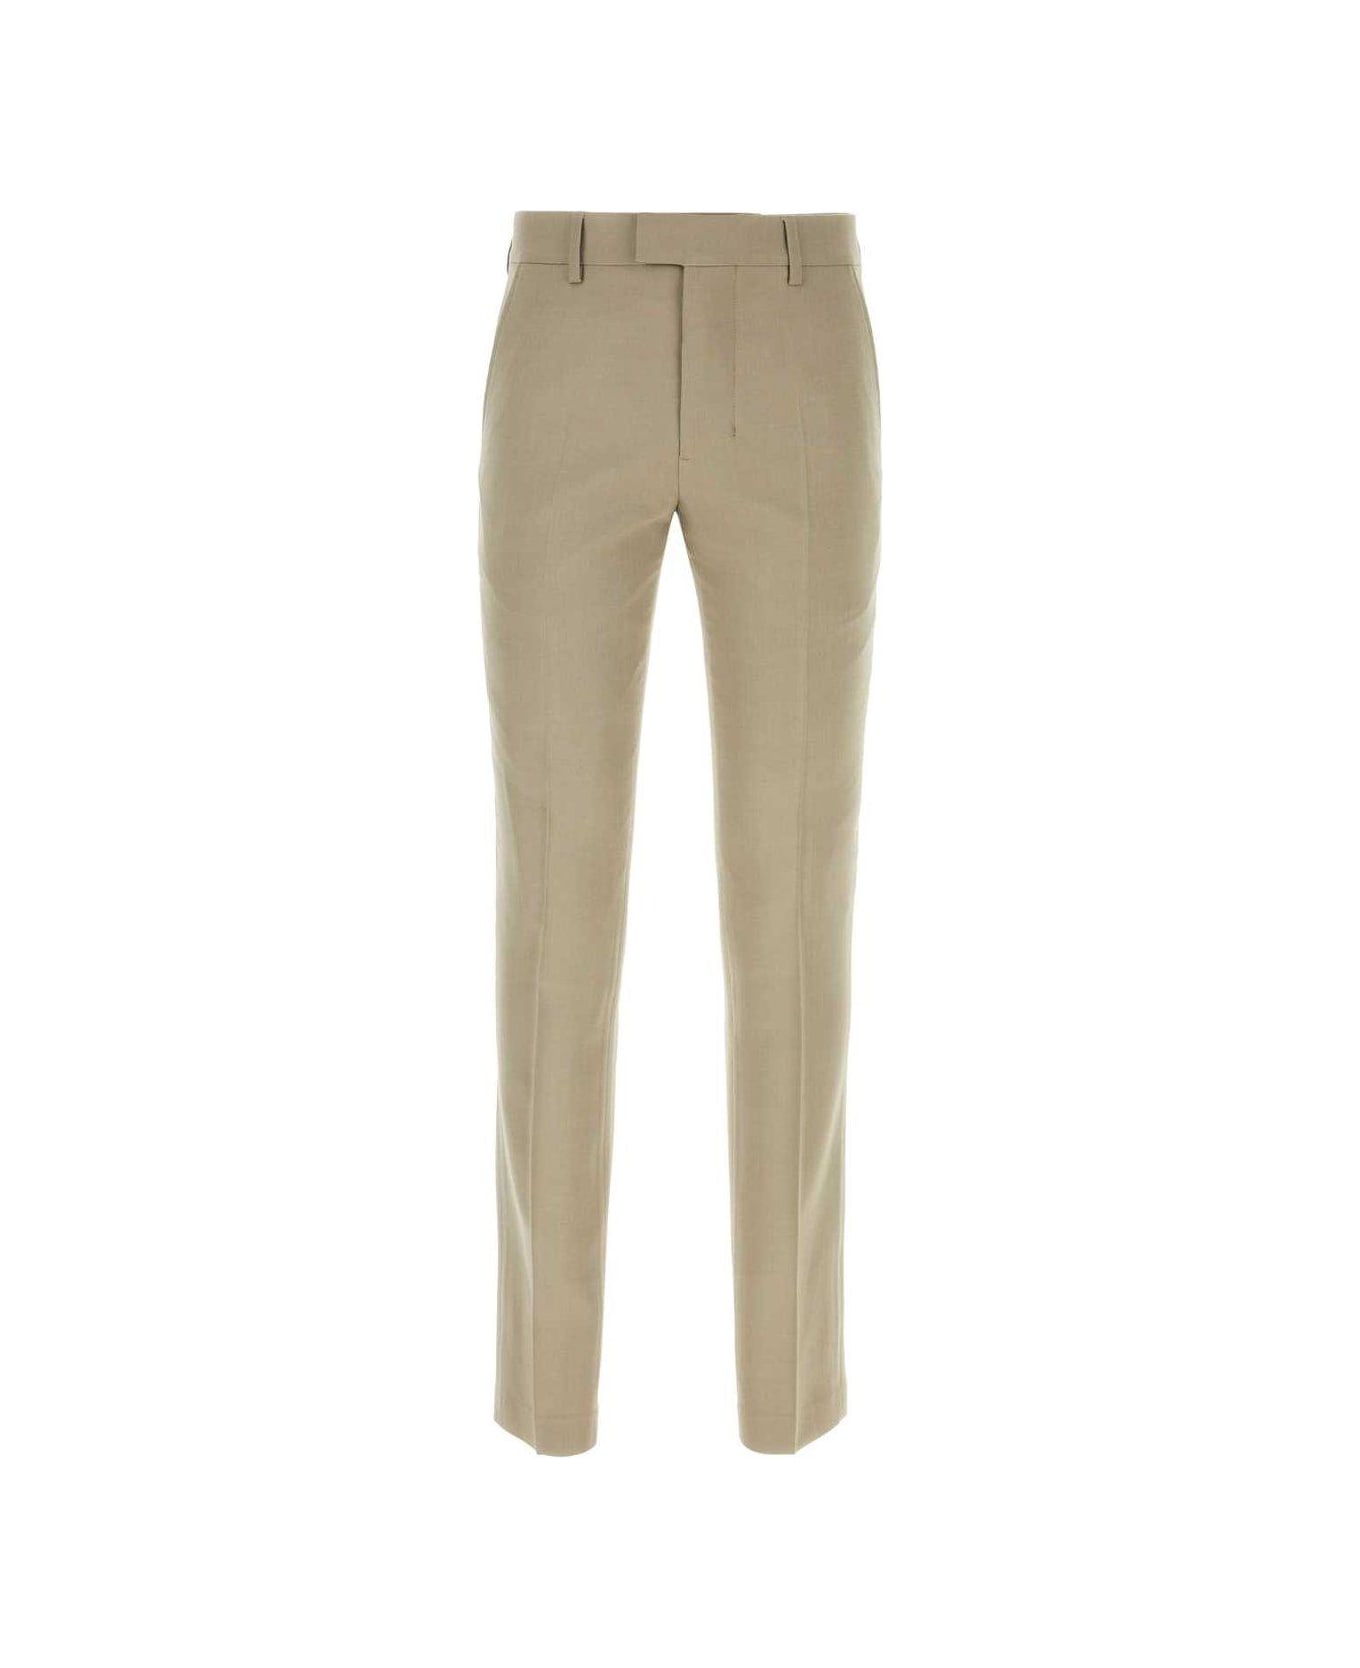 Ami Alexandre Mattiussi Tapered Trousers - Beige ボトムス